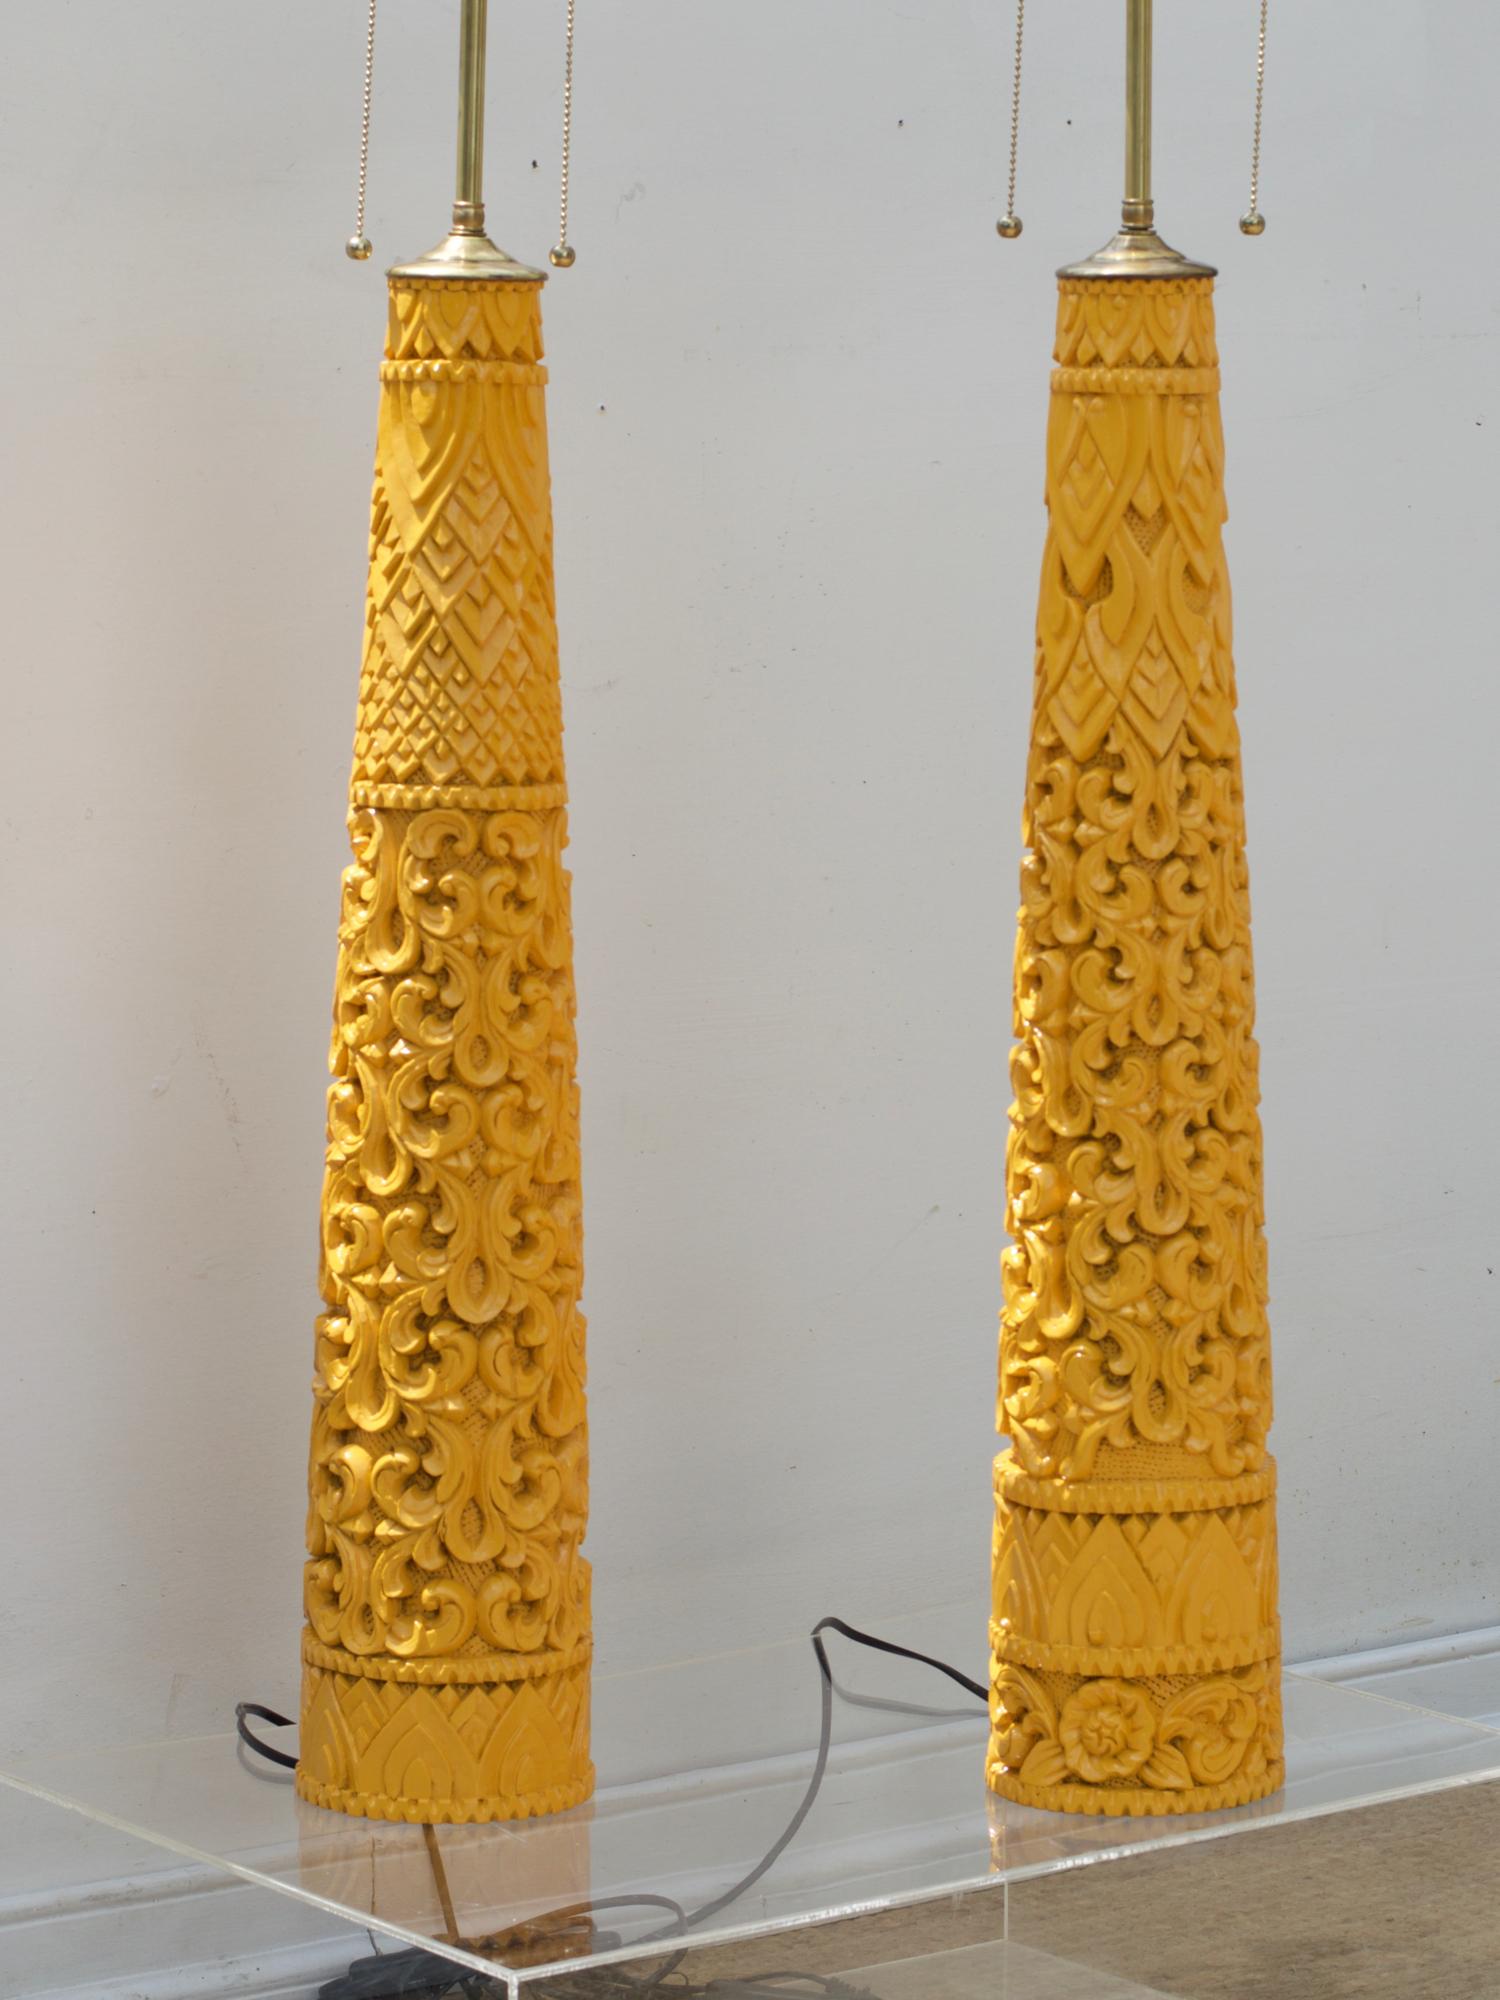 Tall Carved Wood Lamps in Marigold Yellow In Good Condition For Sale In Charlottesville, VA